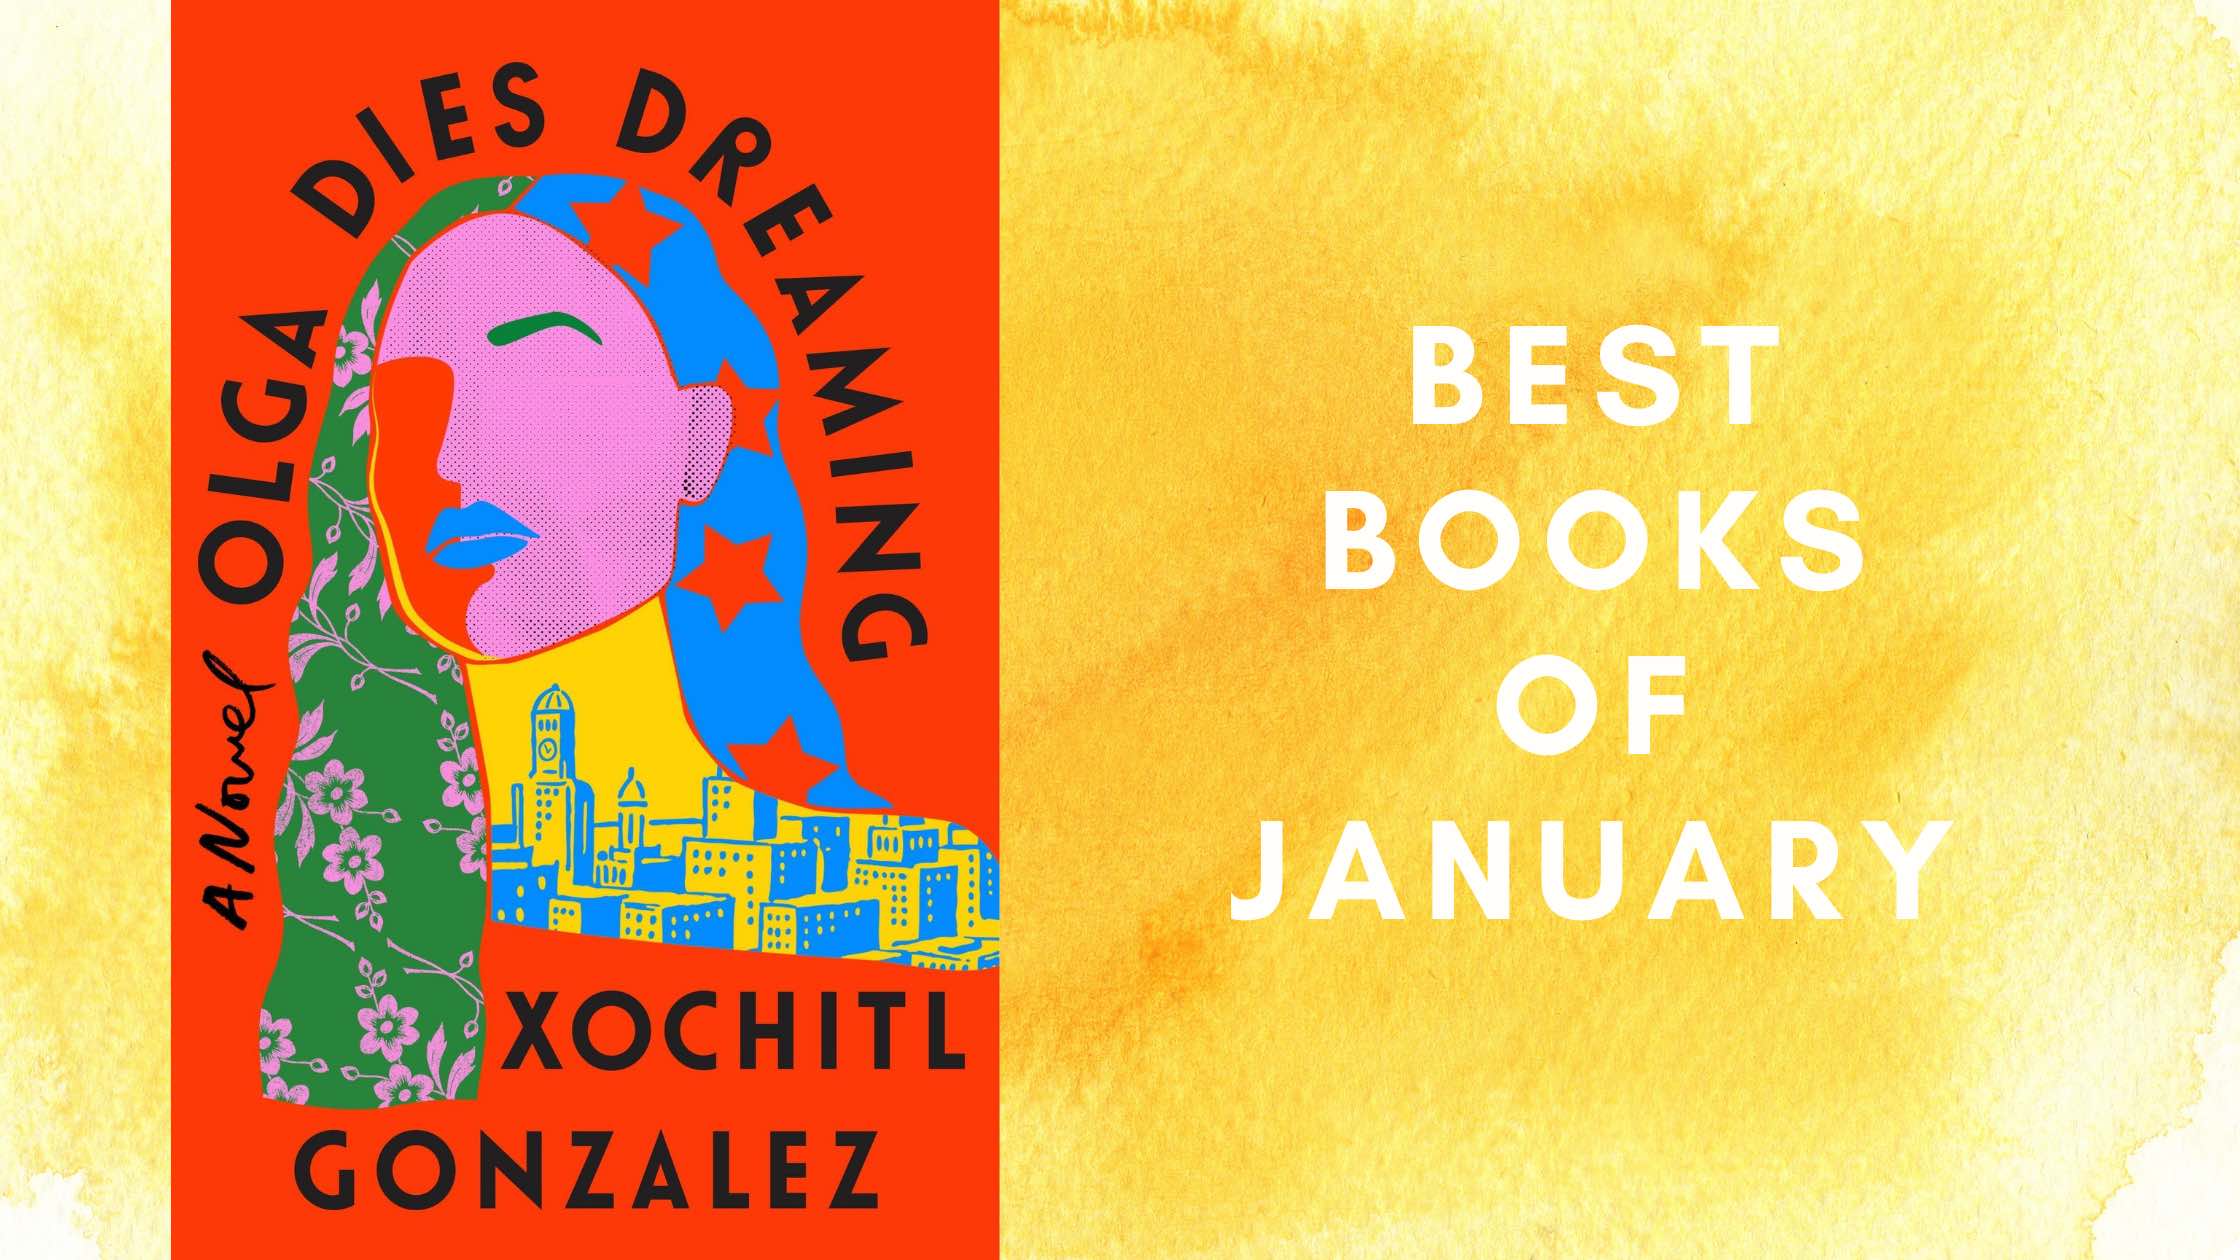 The most anticipated book of January includes Olga Dies Dreaming.